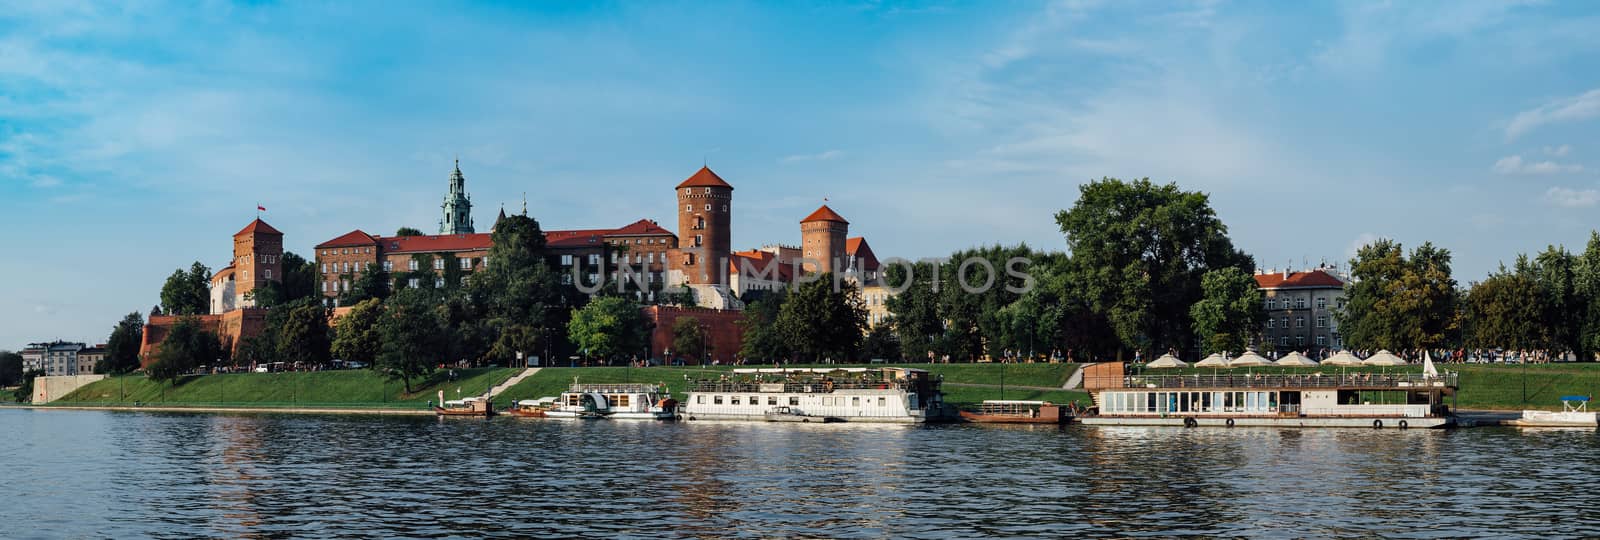 Panoramic view of he Wawel castle in Krakow, Poland, in the foreground the Vistula river.